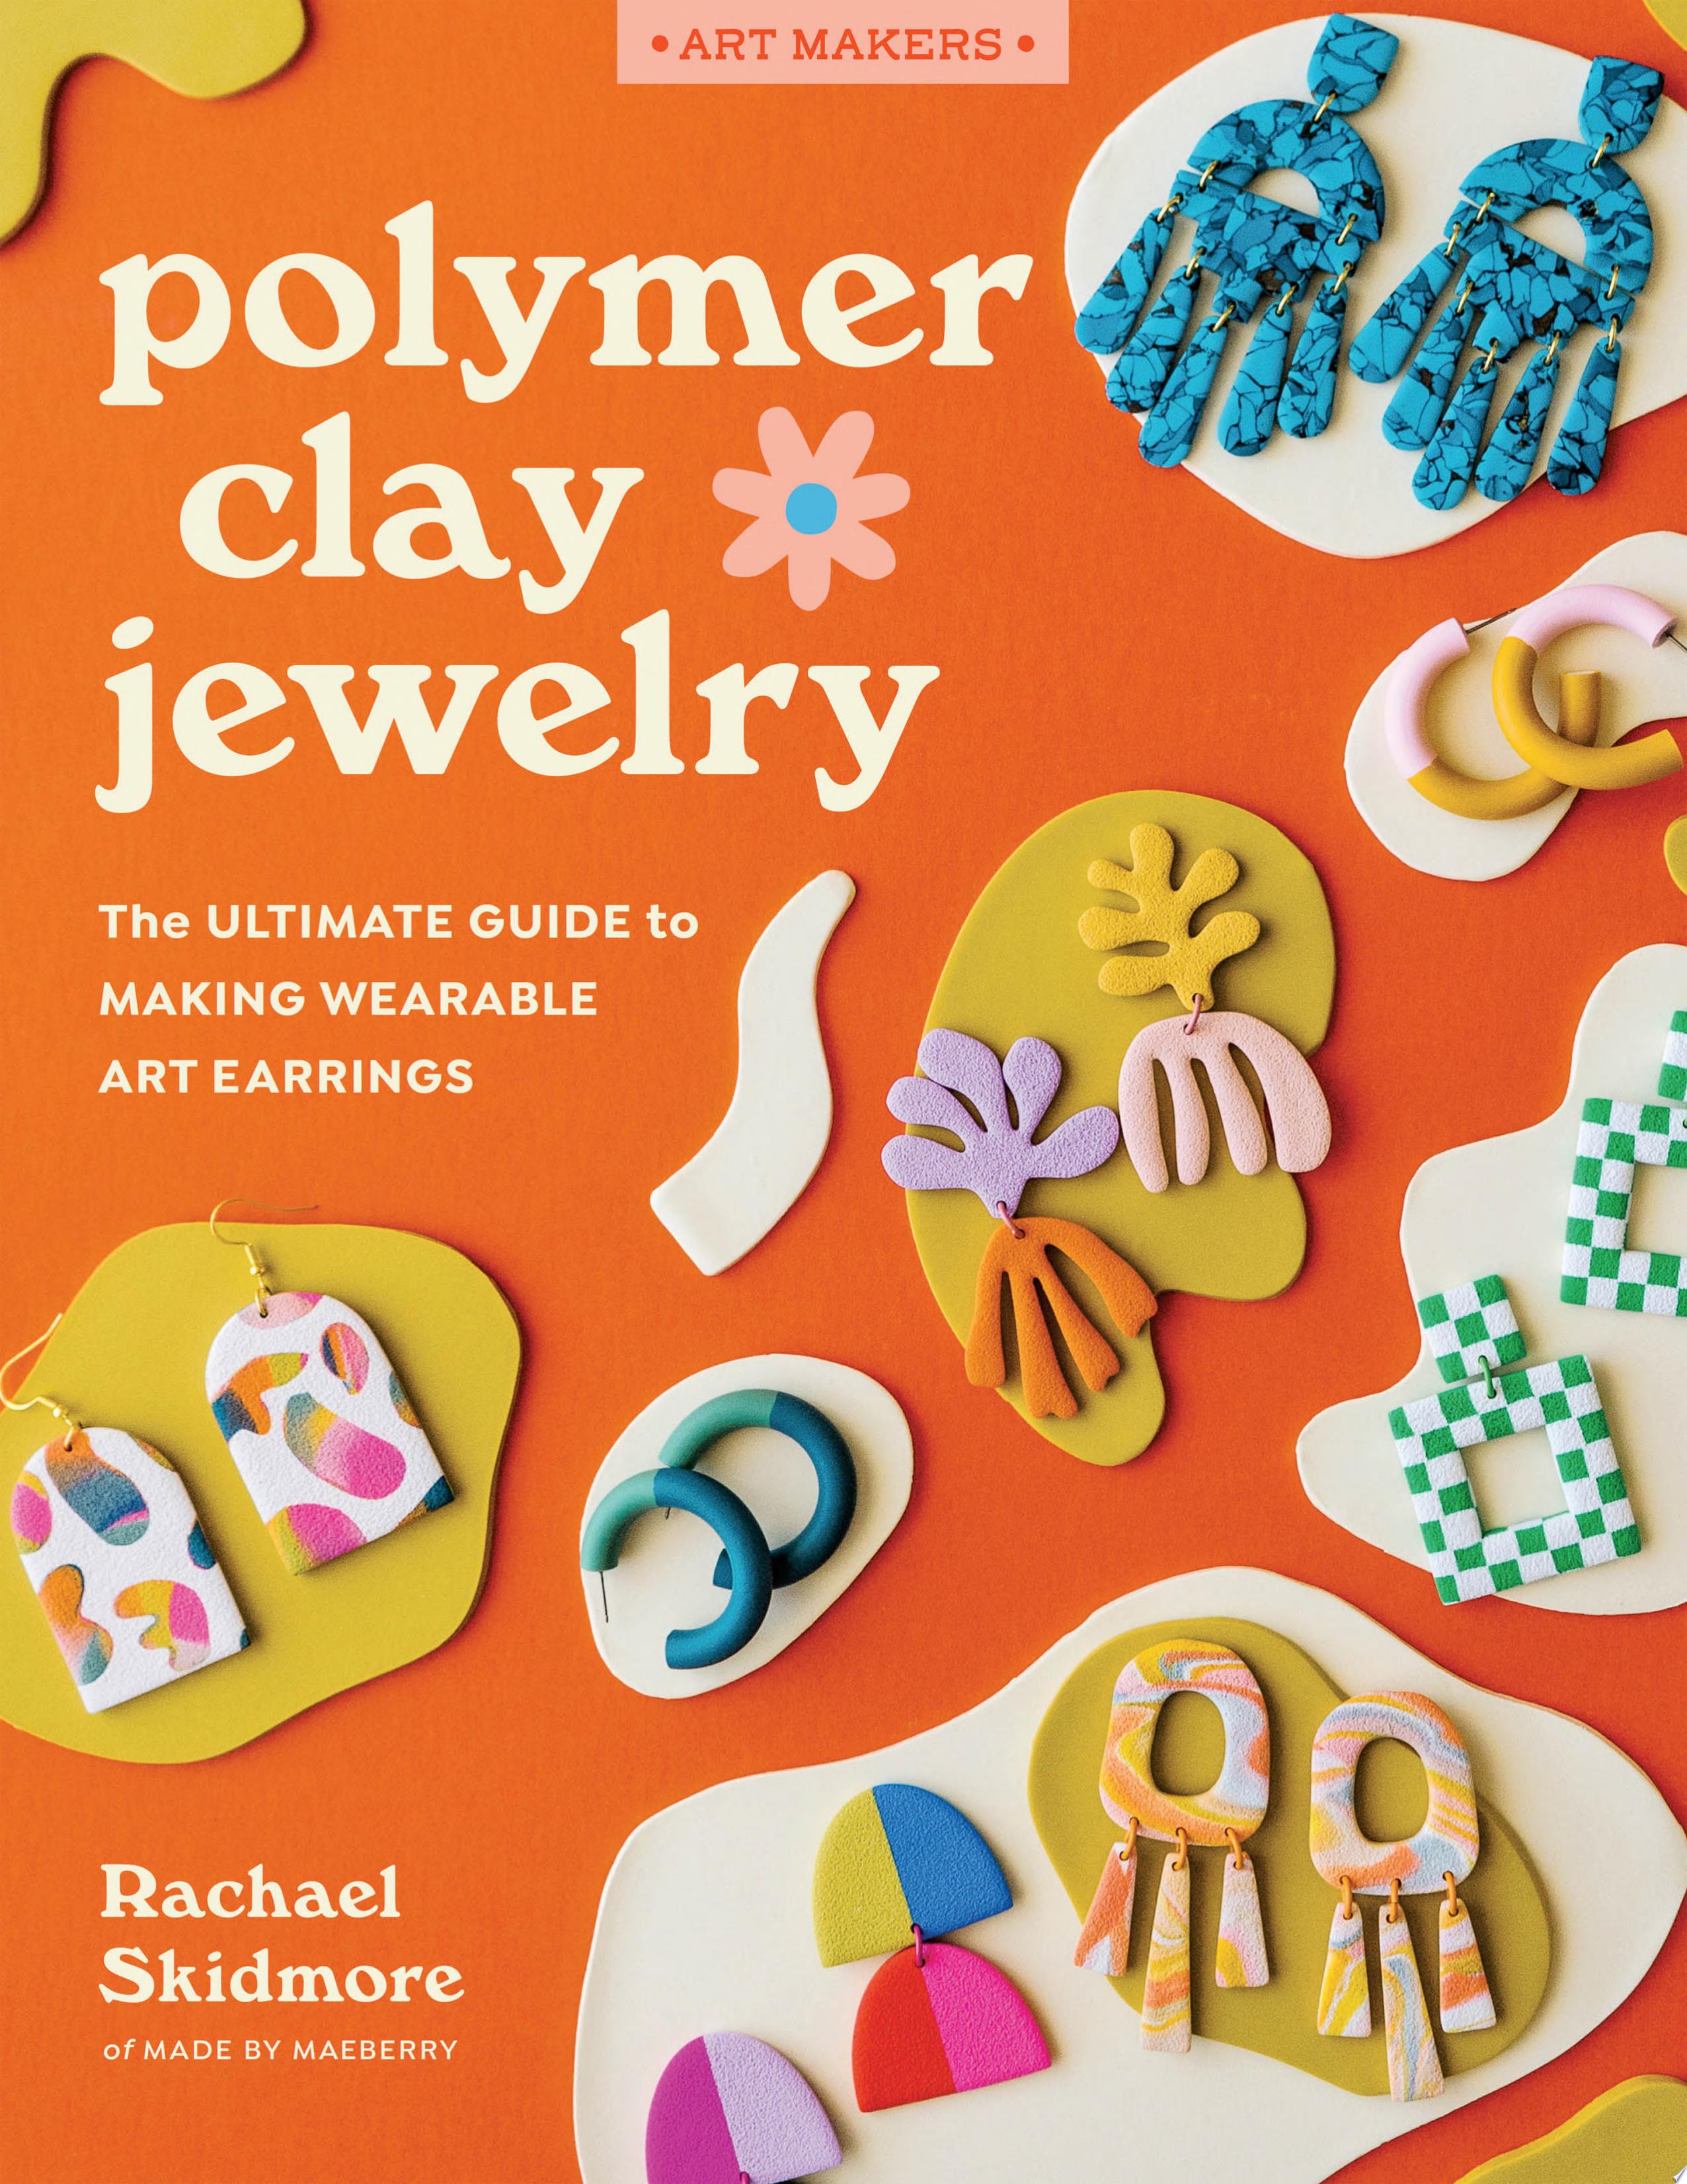 Image for "Polymer Clay Jewelry"